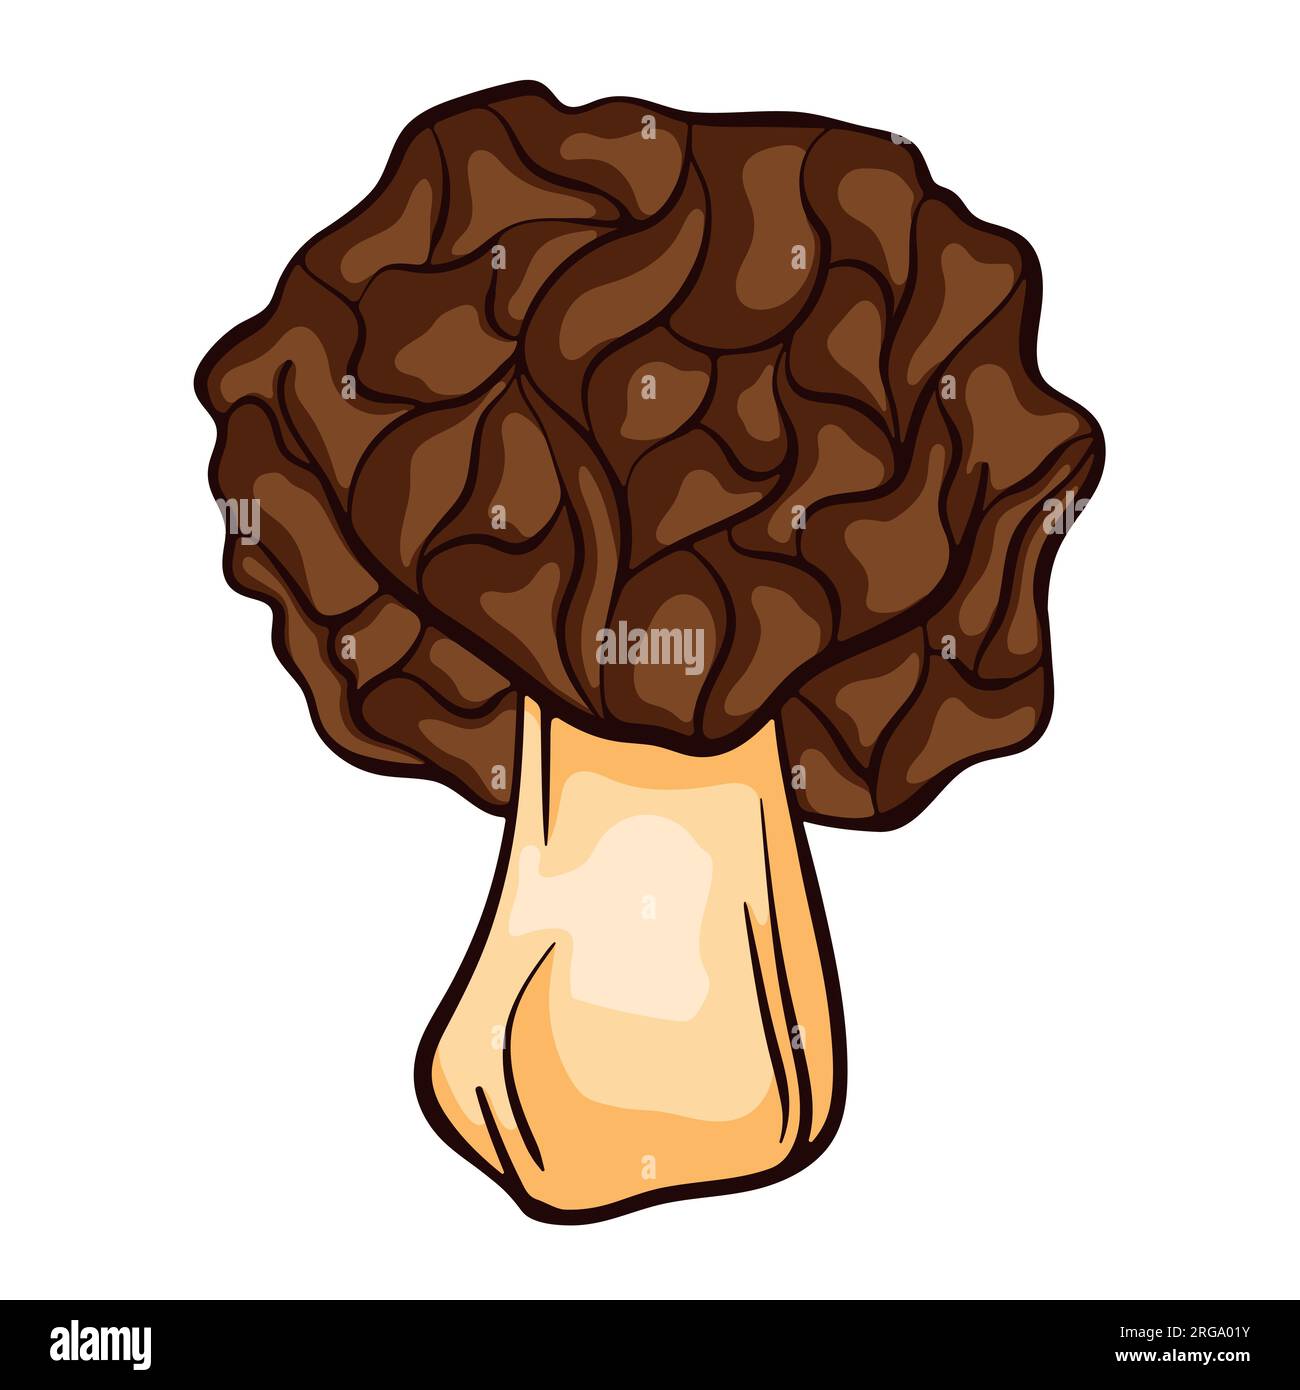 False morel inedible mushroom in cartoon style. Great for menu, label, product packaging, recipe. Vector illustration isolated on a white background Stock Vector